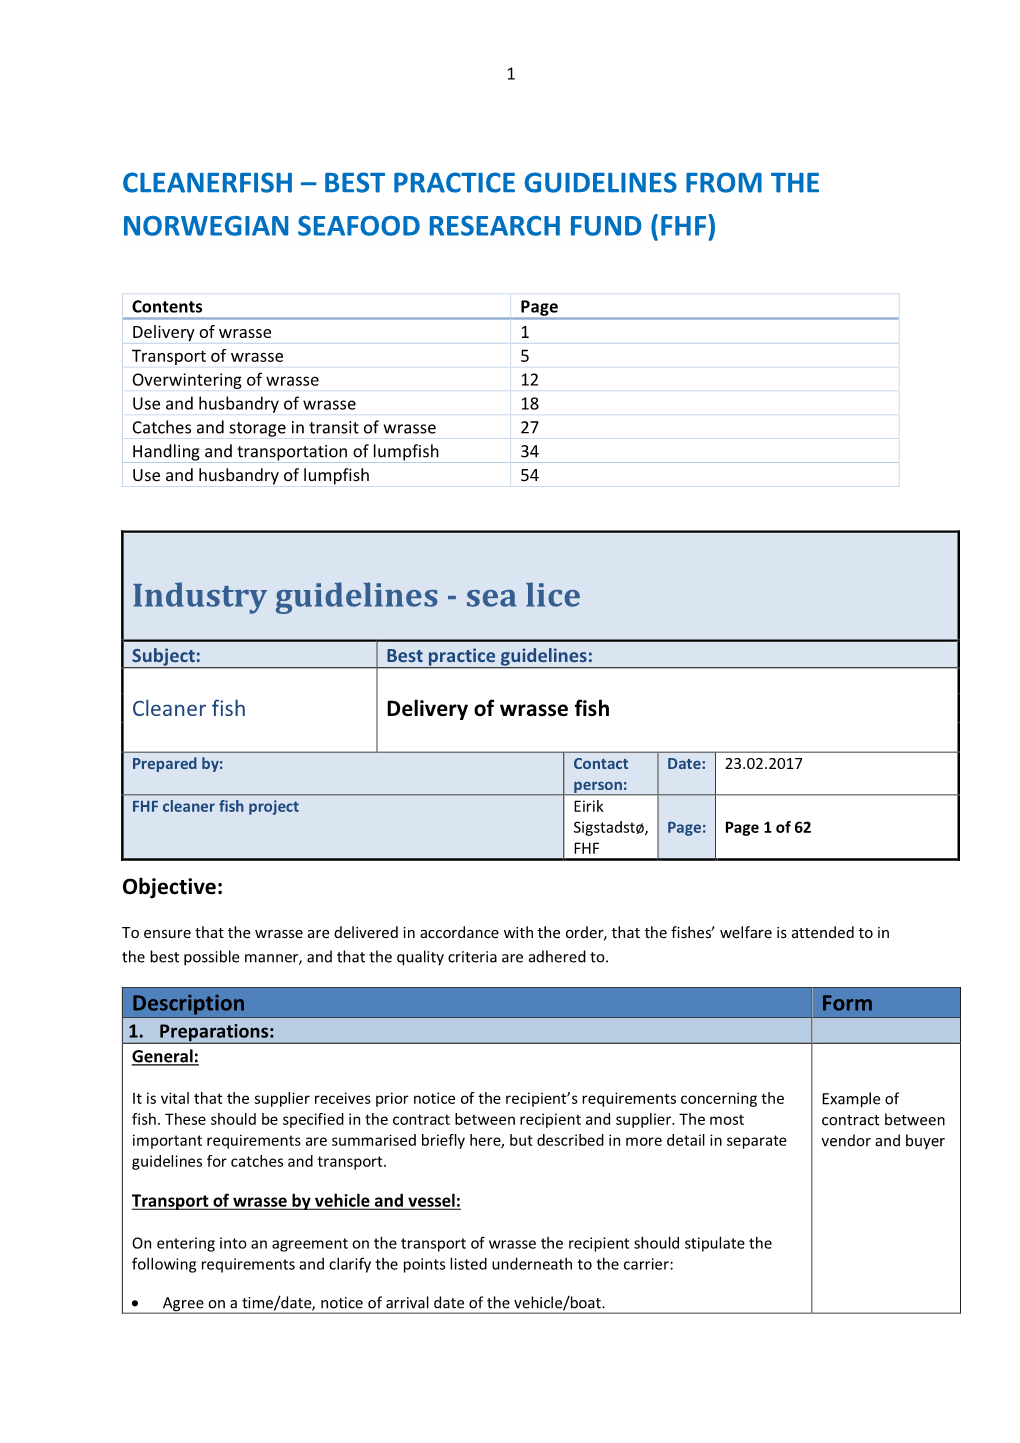 Industry Guidelines - Sea Lice